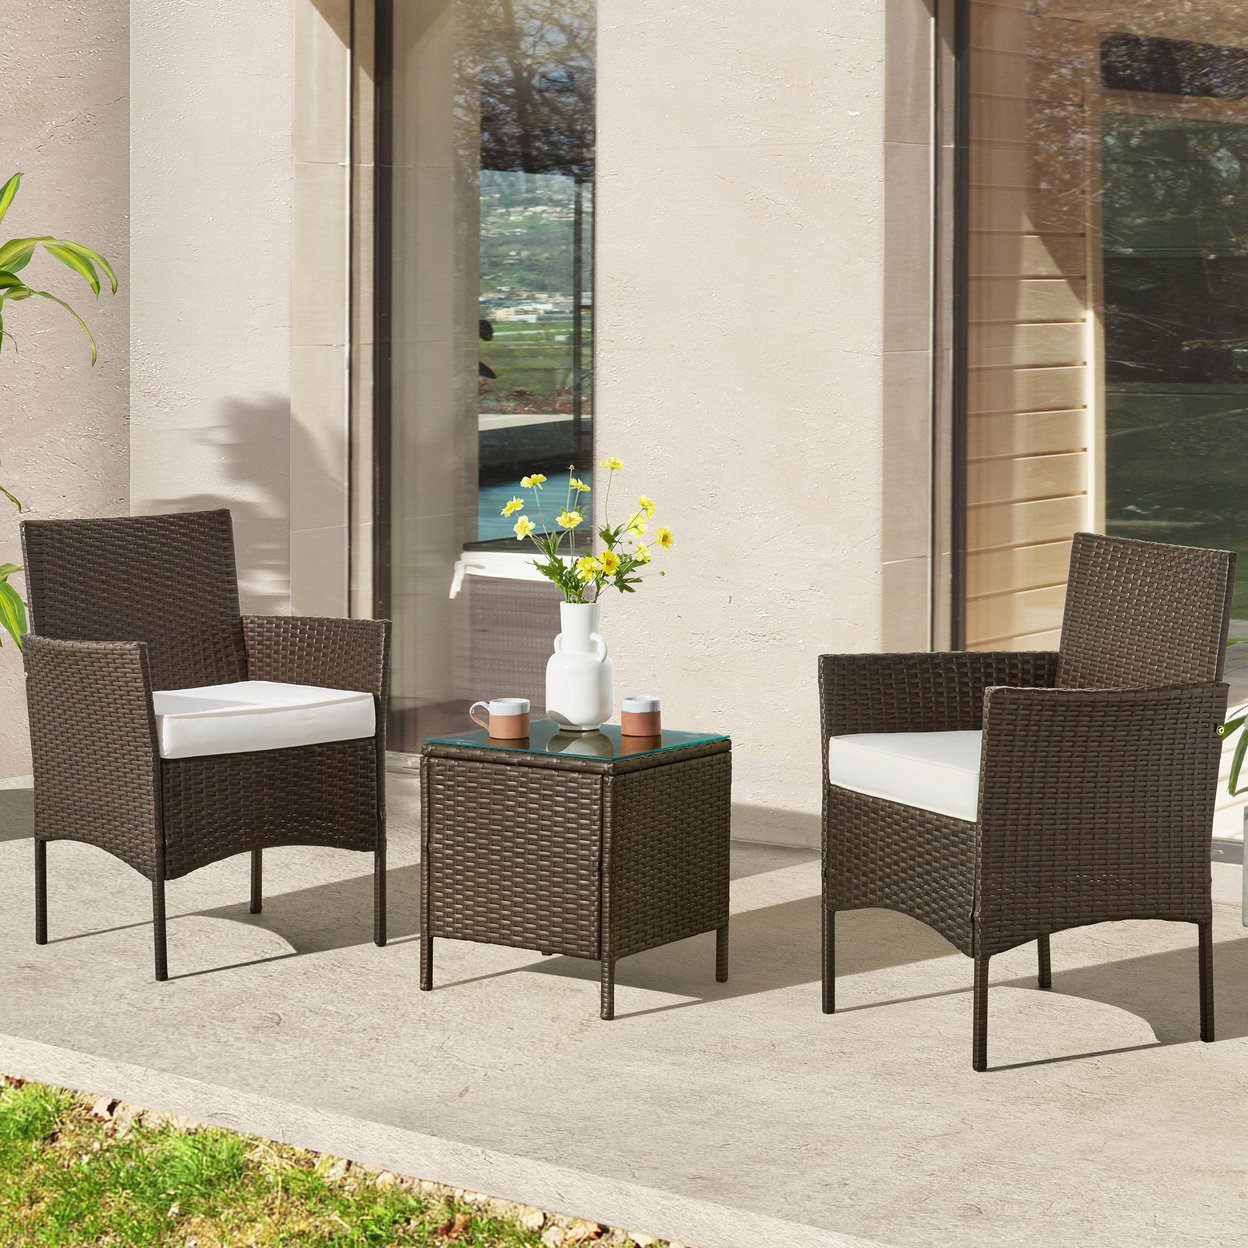 Patio Furniture Set 3pc Outdoor Rattan Seating 2 Cushioned Chairs Table, Brown